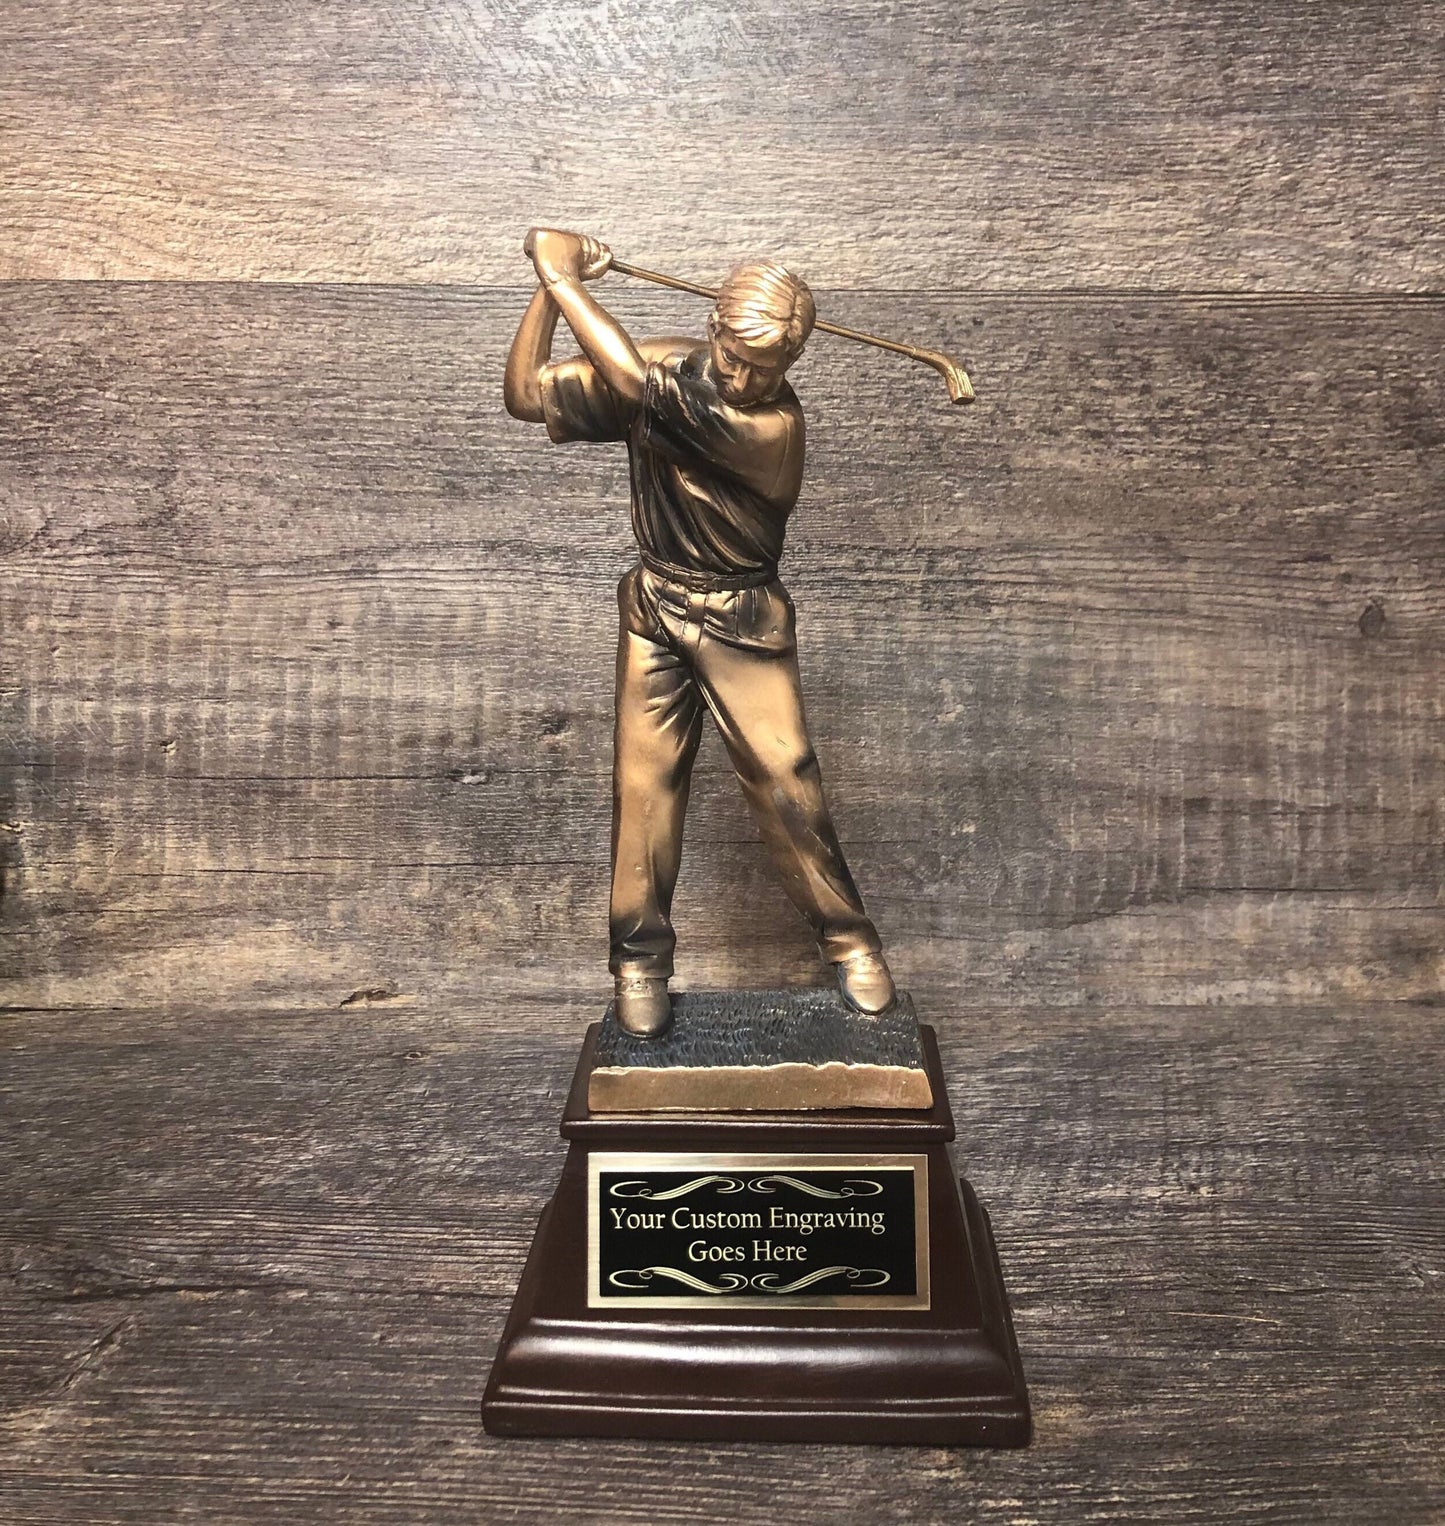 Classic Golf Trophy Tournament Trophy Golf Charity Event Trophy Hole In One Under Par Bragging Rights Best Score Guys Weekend Trip